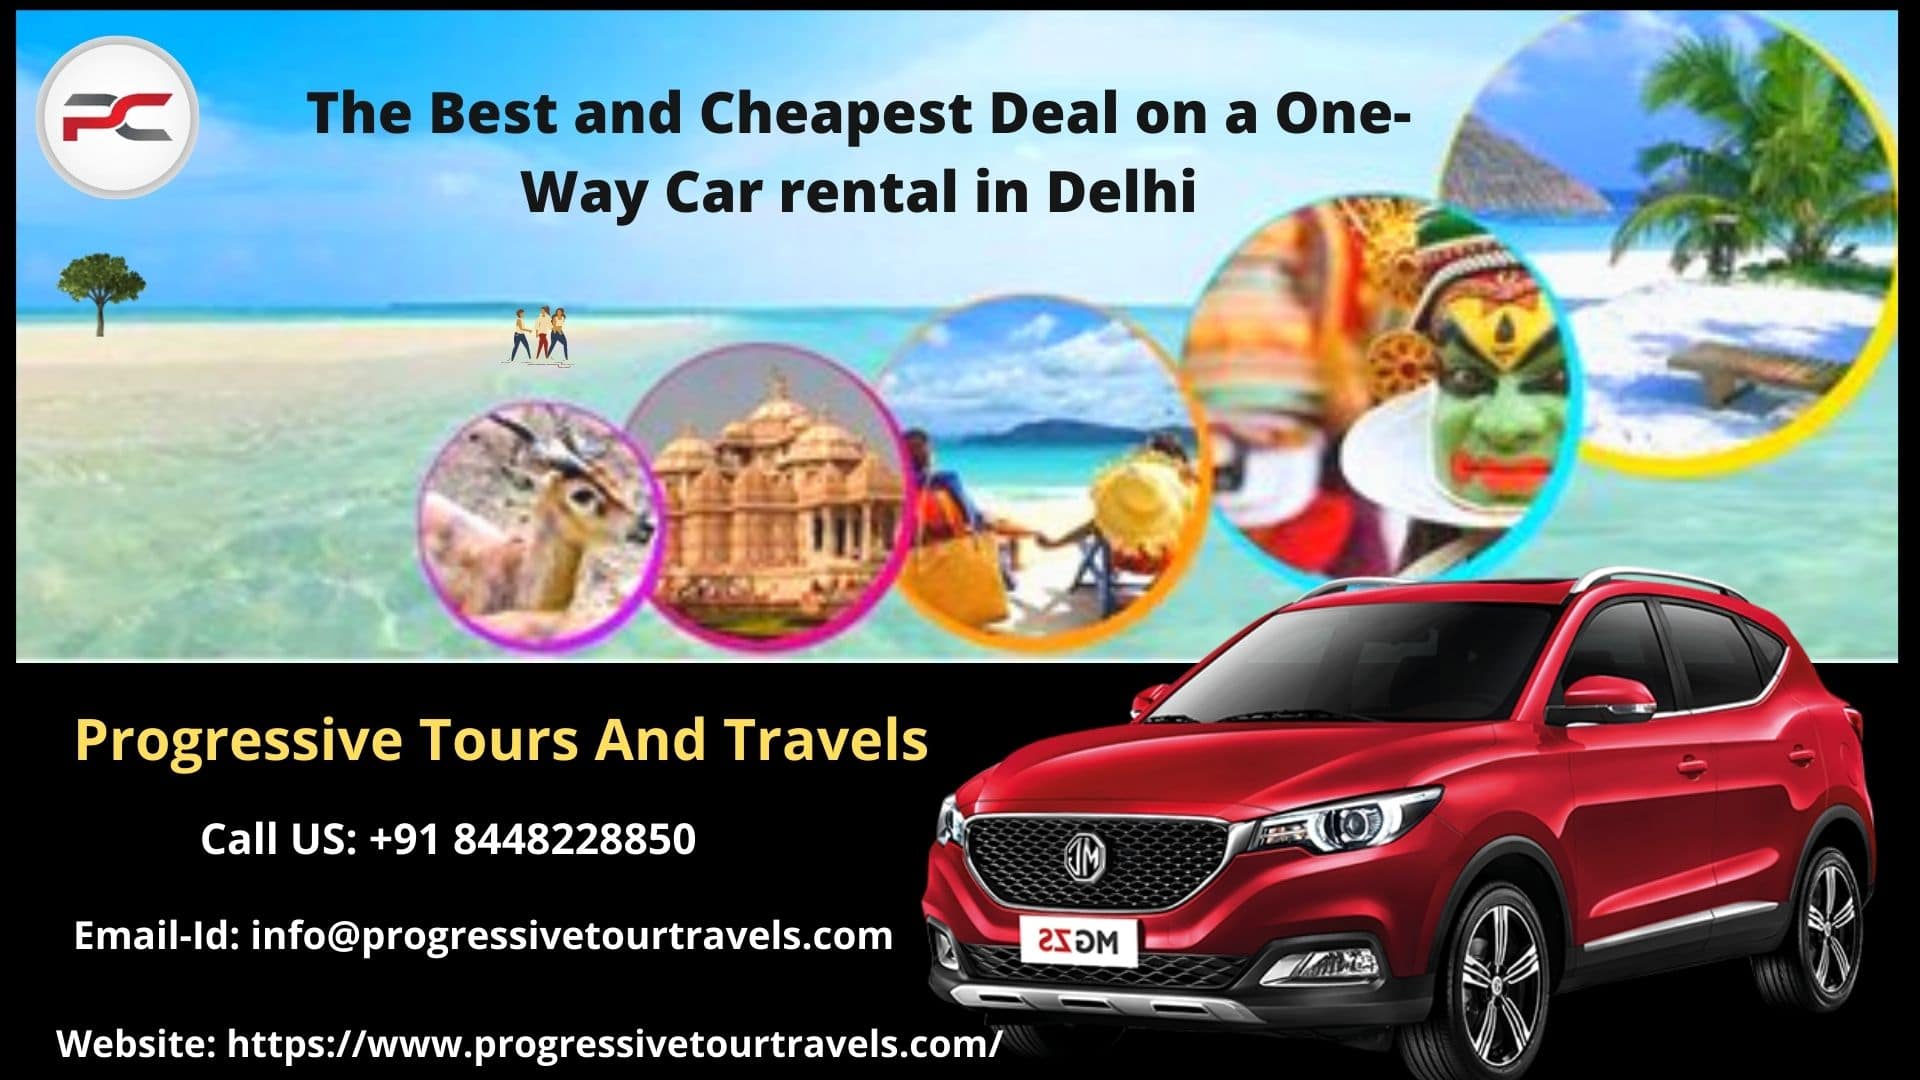 The Best and Cheapest Deal on a One-Way Car rental in Delhi-45aa61f6